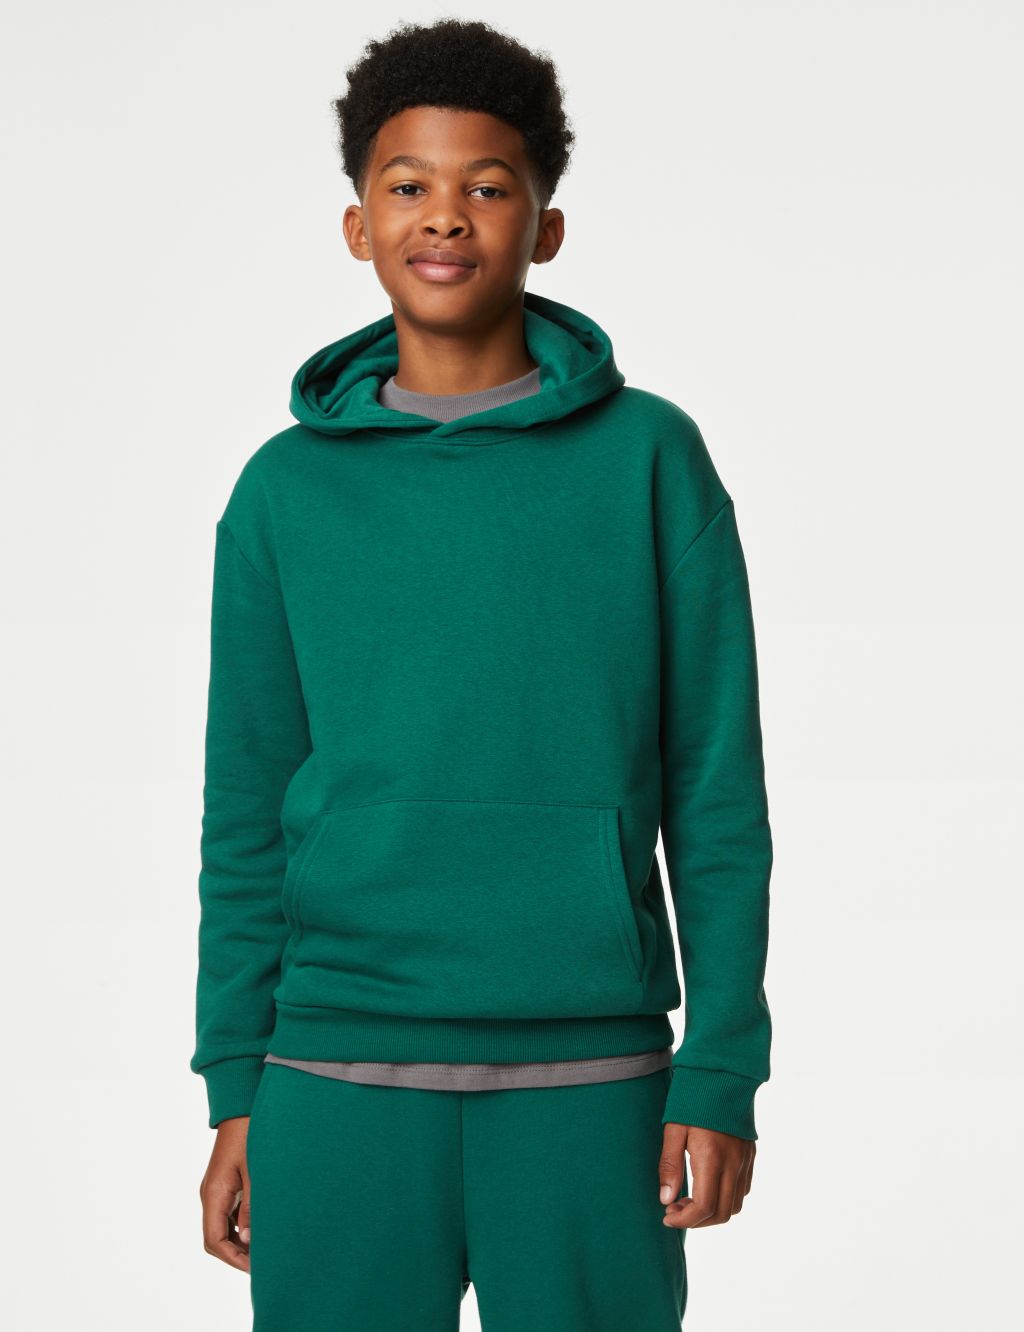 Hoodie & Jogger Outfit image 2